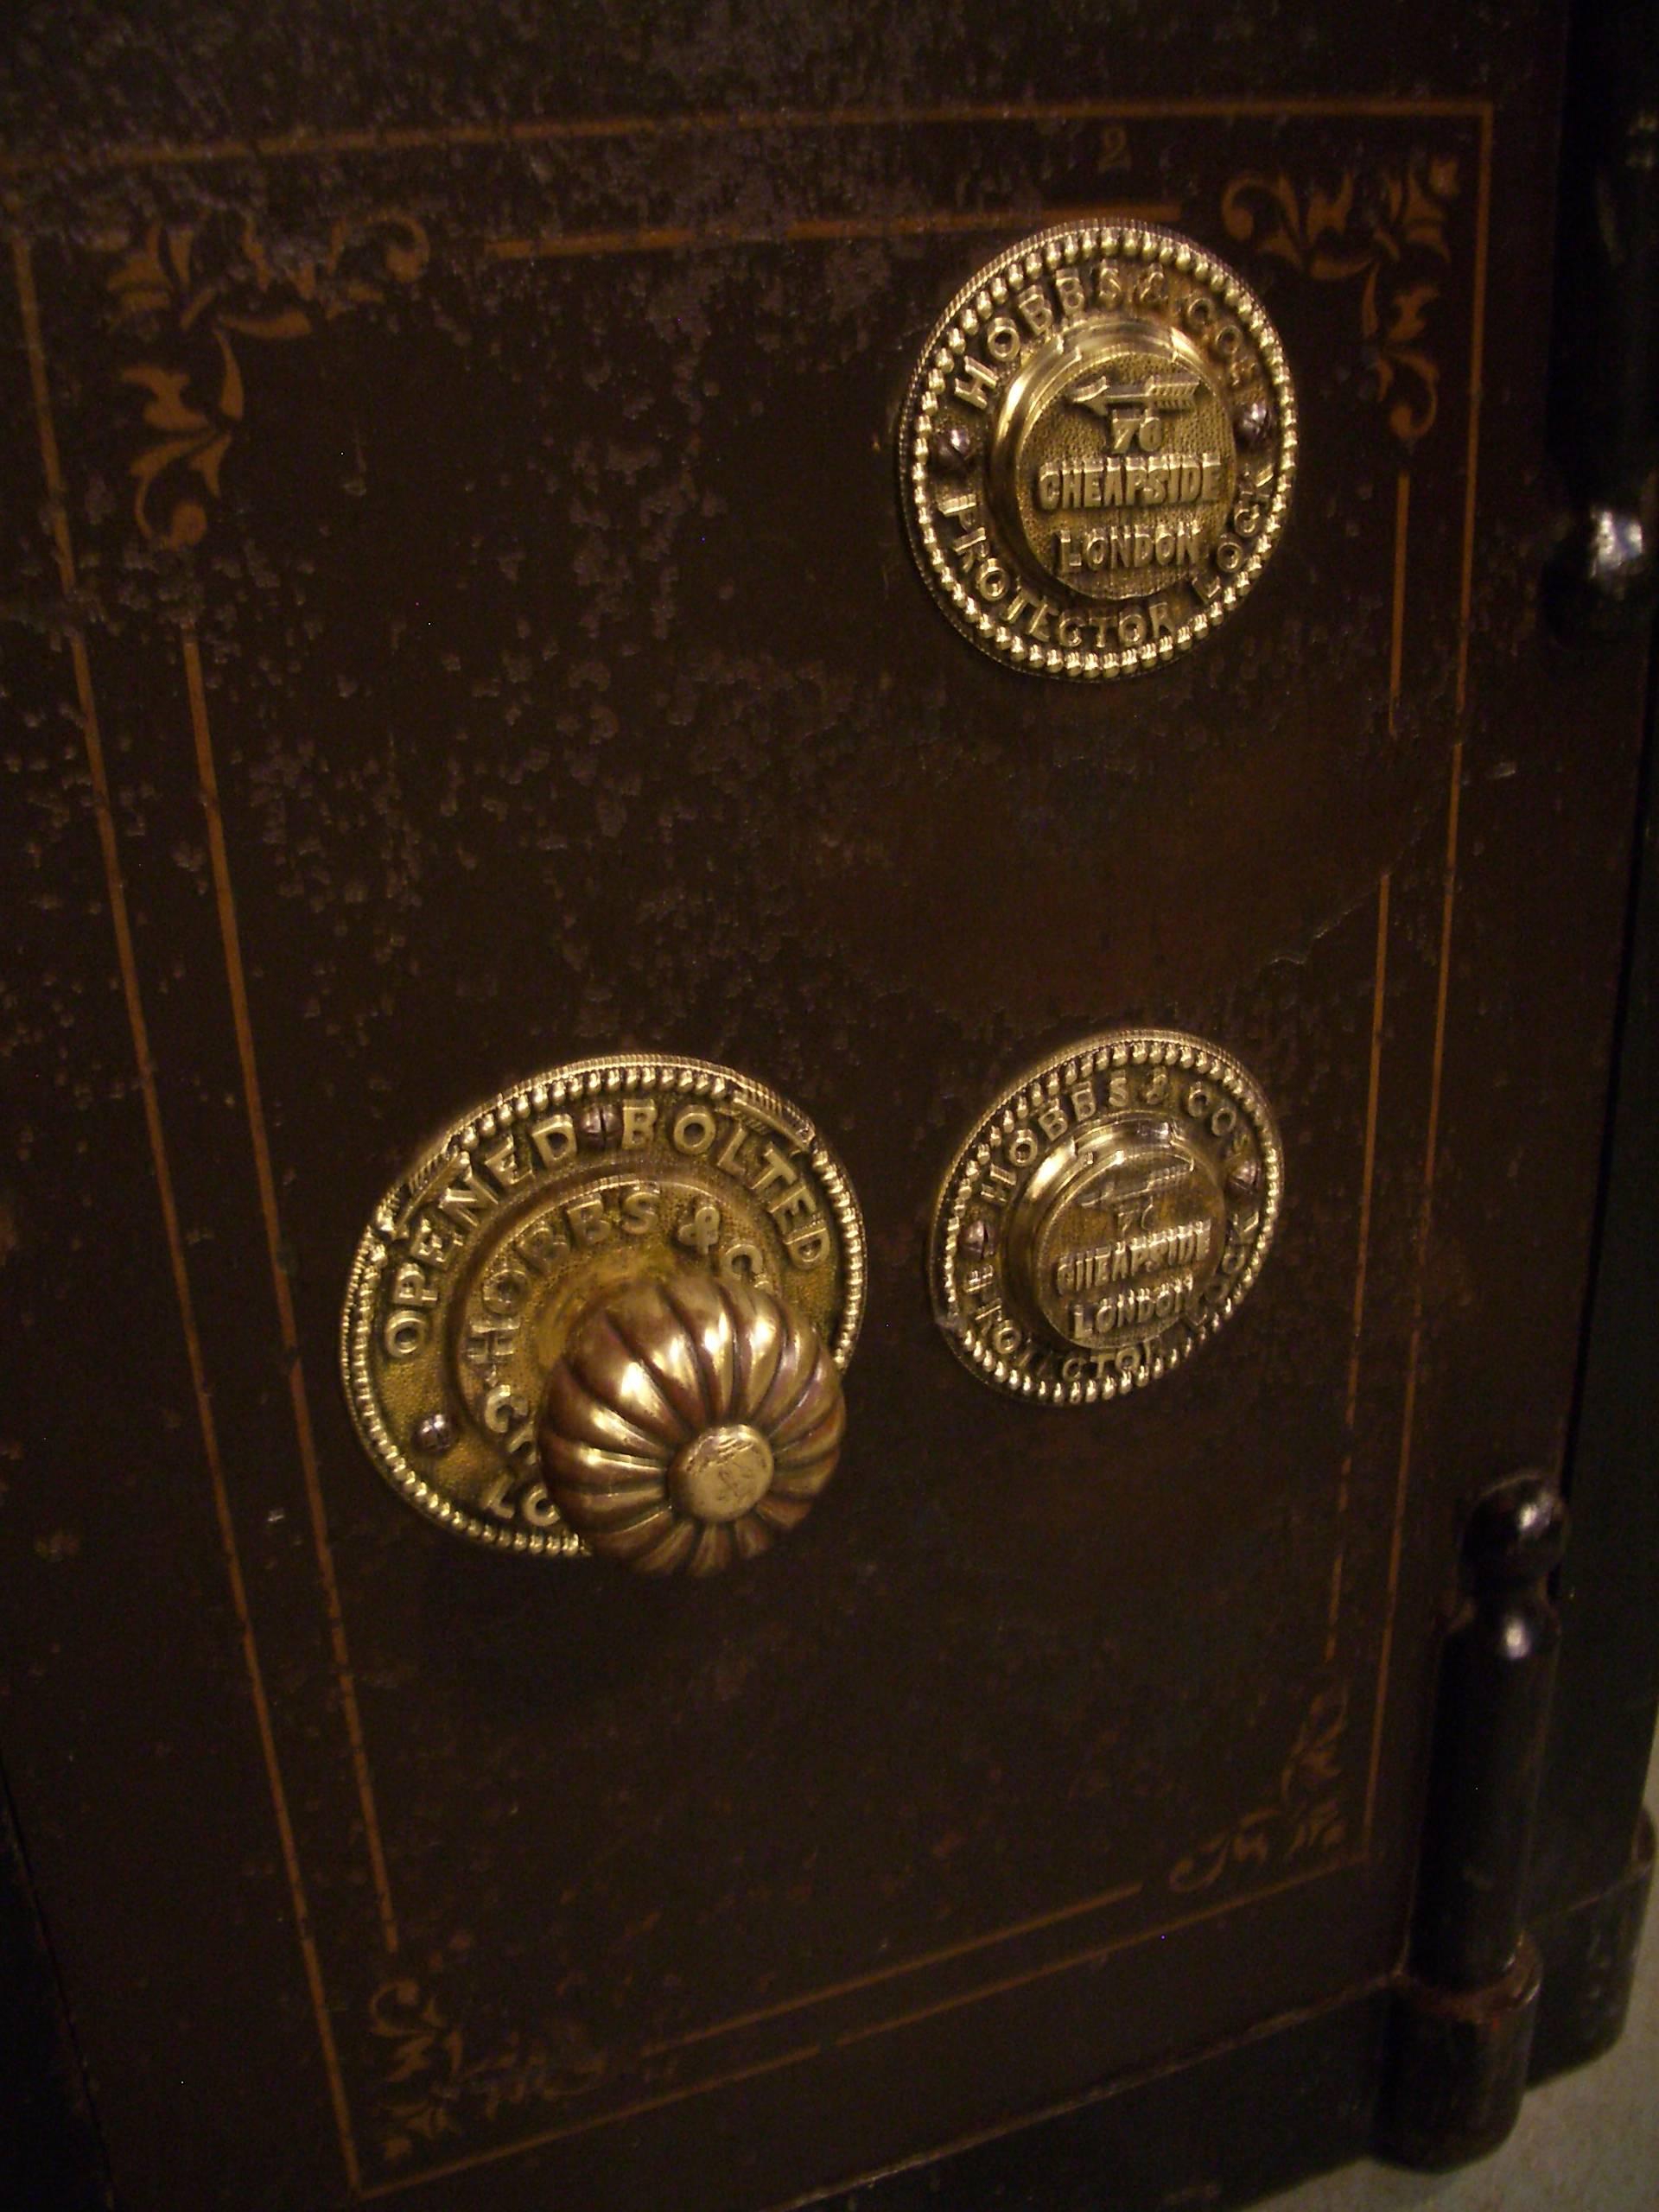 Impressive safe made by the company Hobbs & Co. Londen United Kingdom
The unique feature of this safe is that it has two protector locks. To this day these locks are very difficult to open without the key.

The safe is in beautiful original